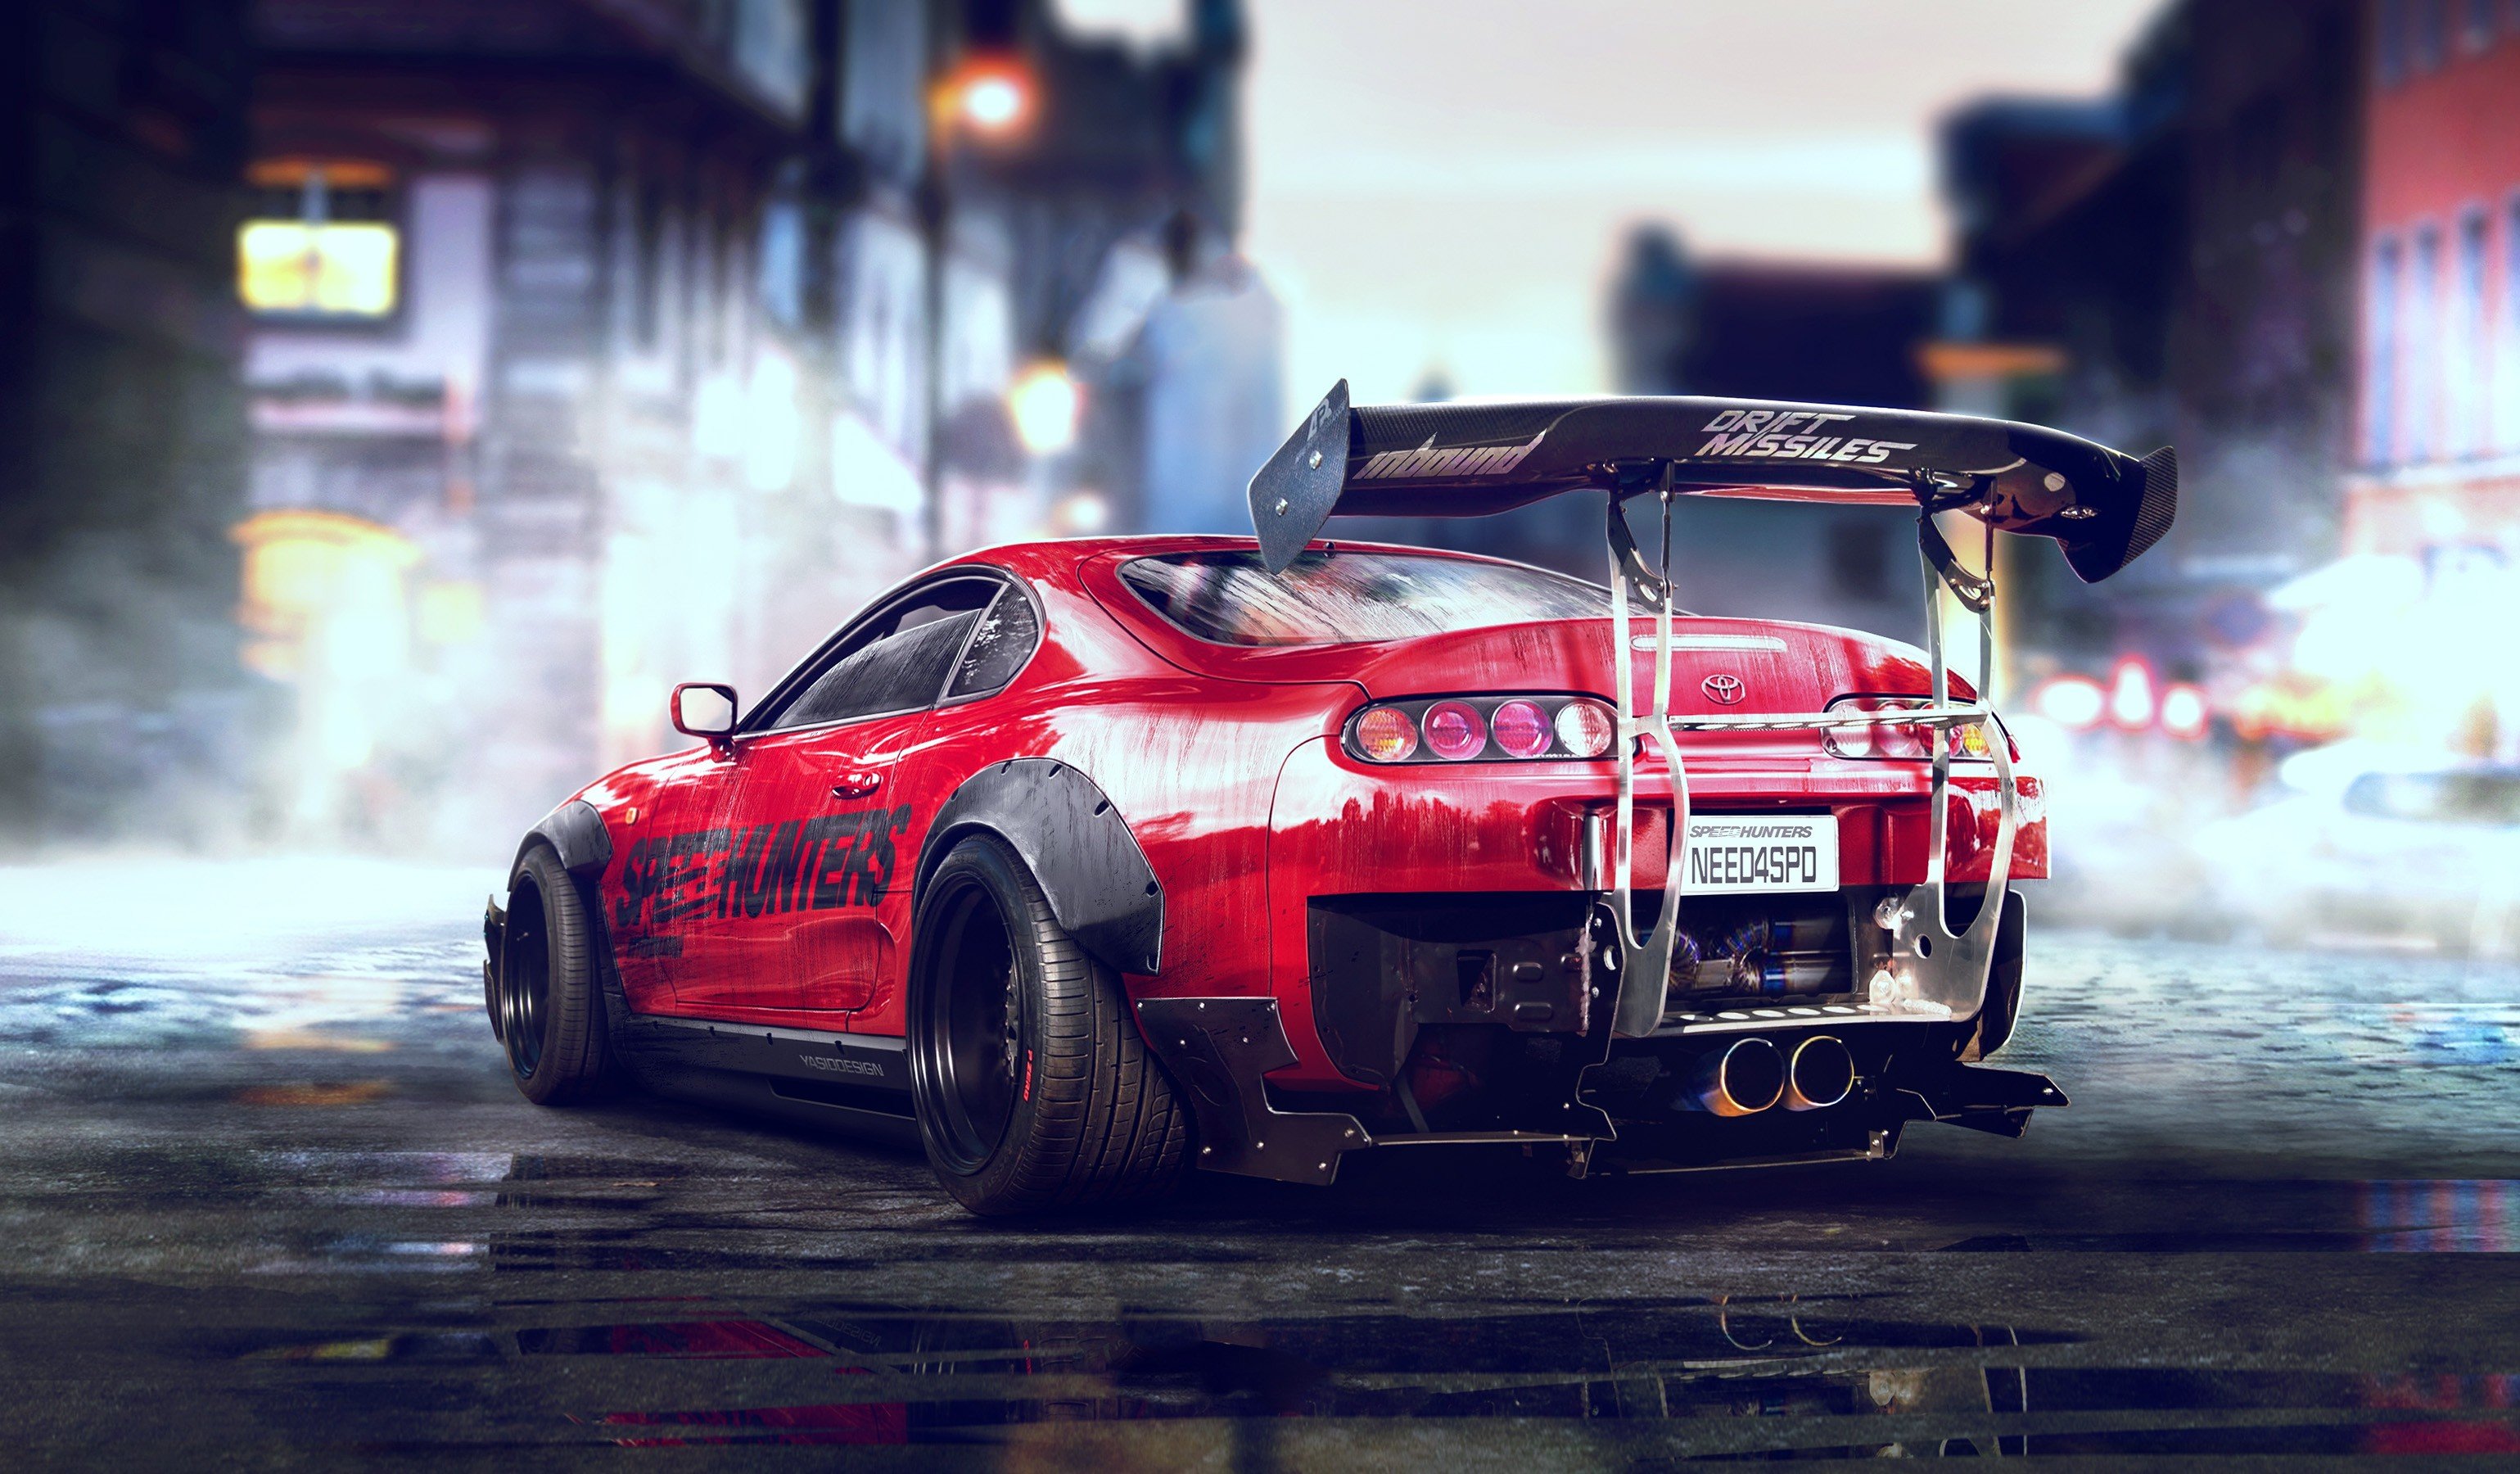 Toyota Supra, Need for Speed, Engine exhaust, Car, Red, Speedhunters Wallpaper